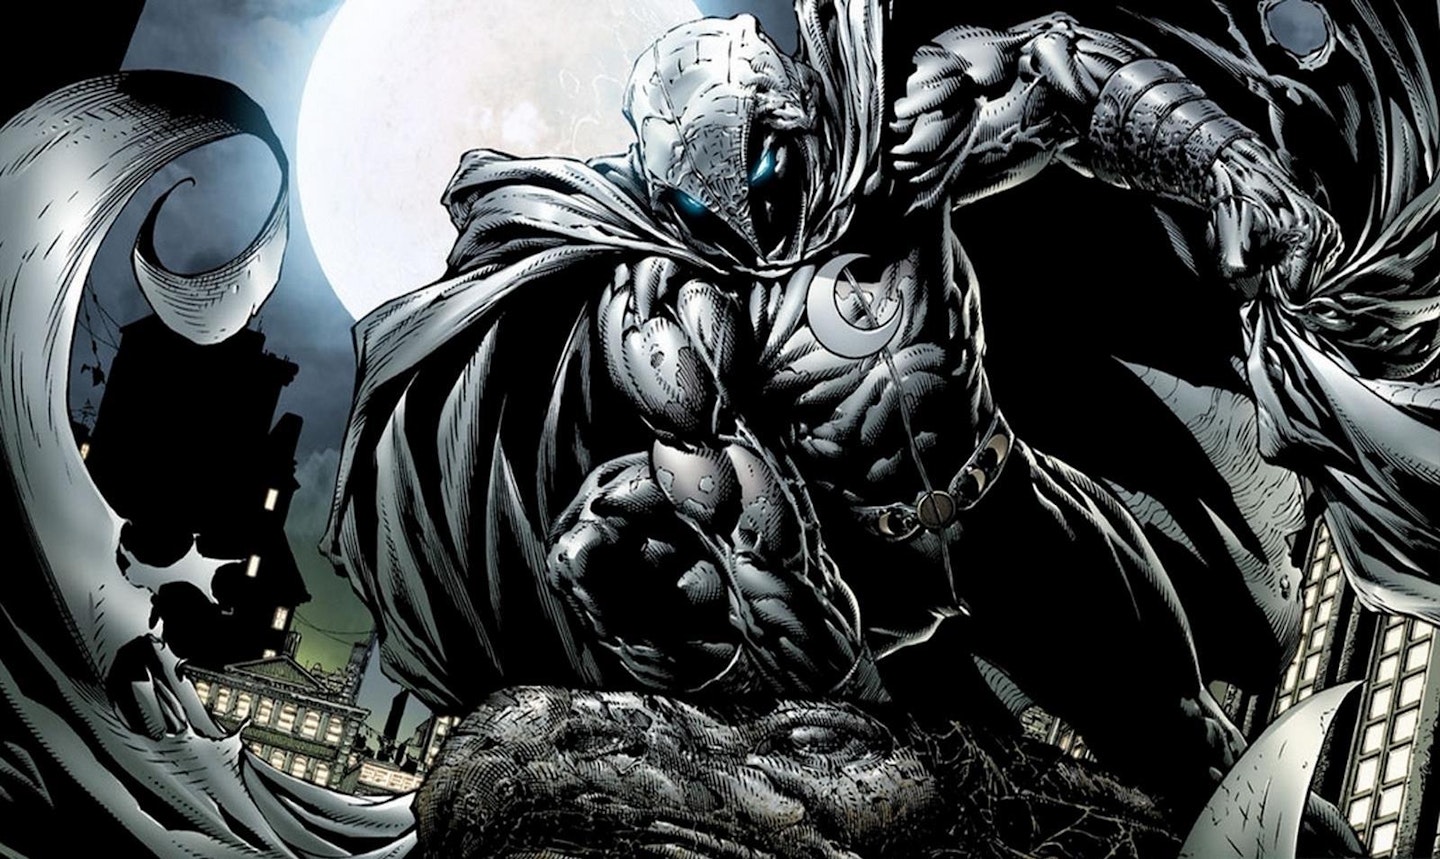 MOON KNIGHT Trailer Showcases Marc Spector in All His Chaos